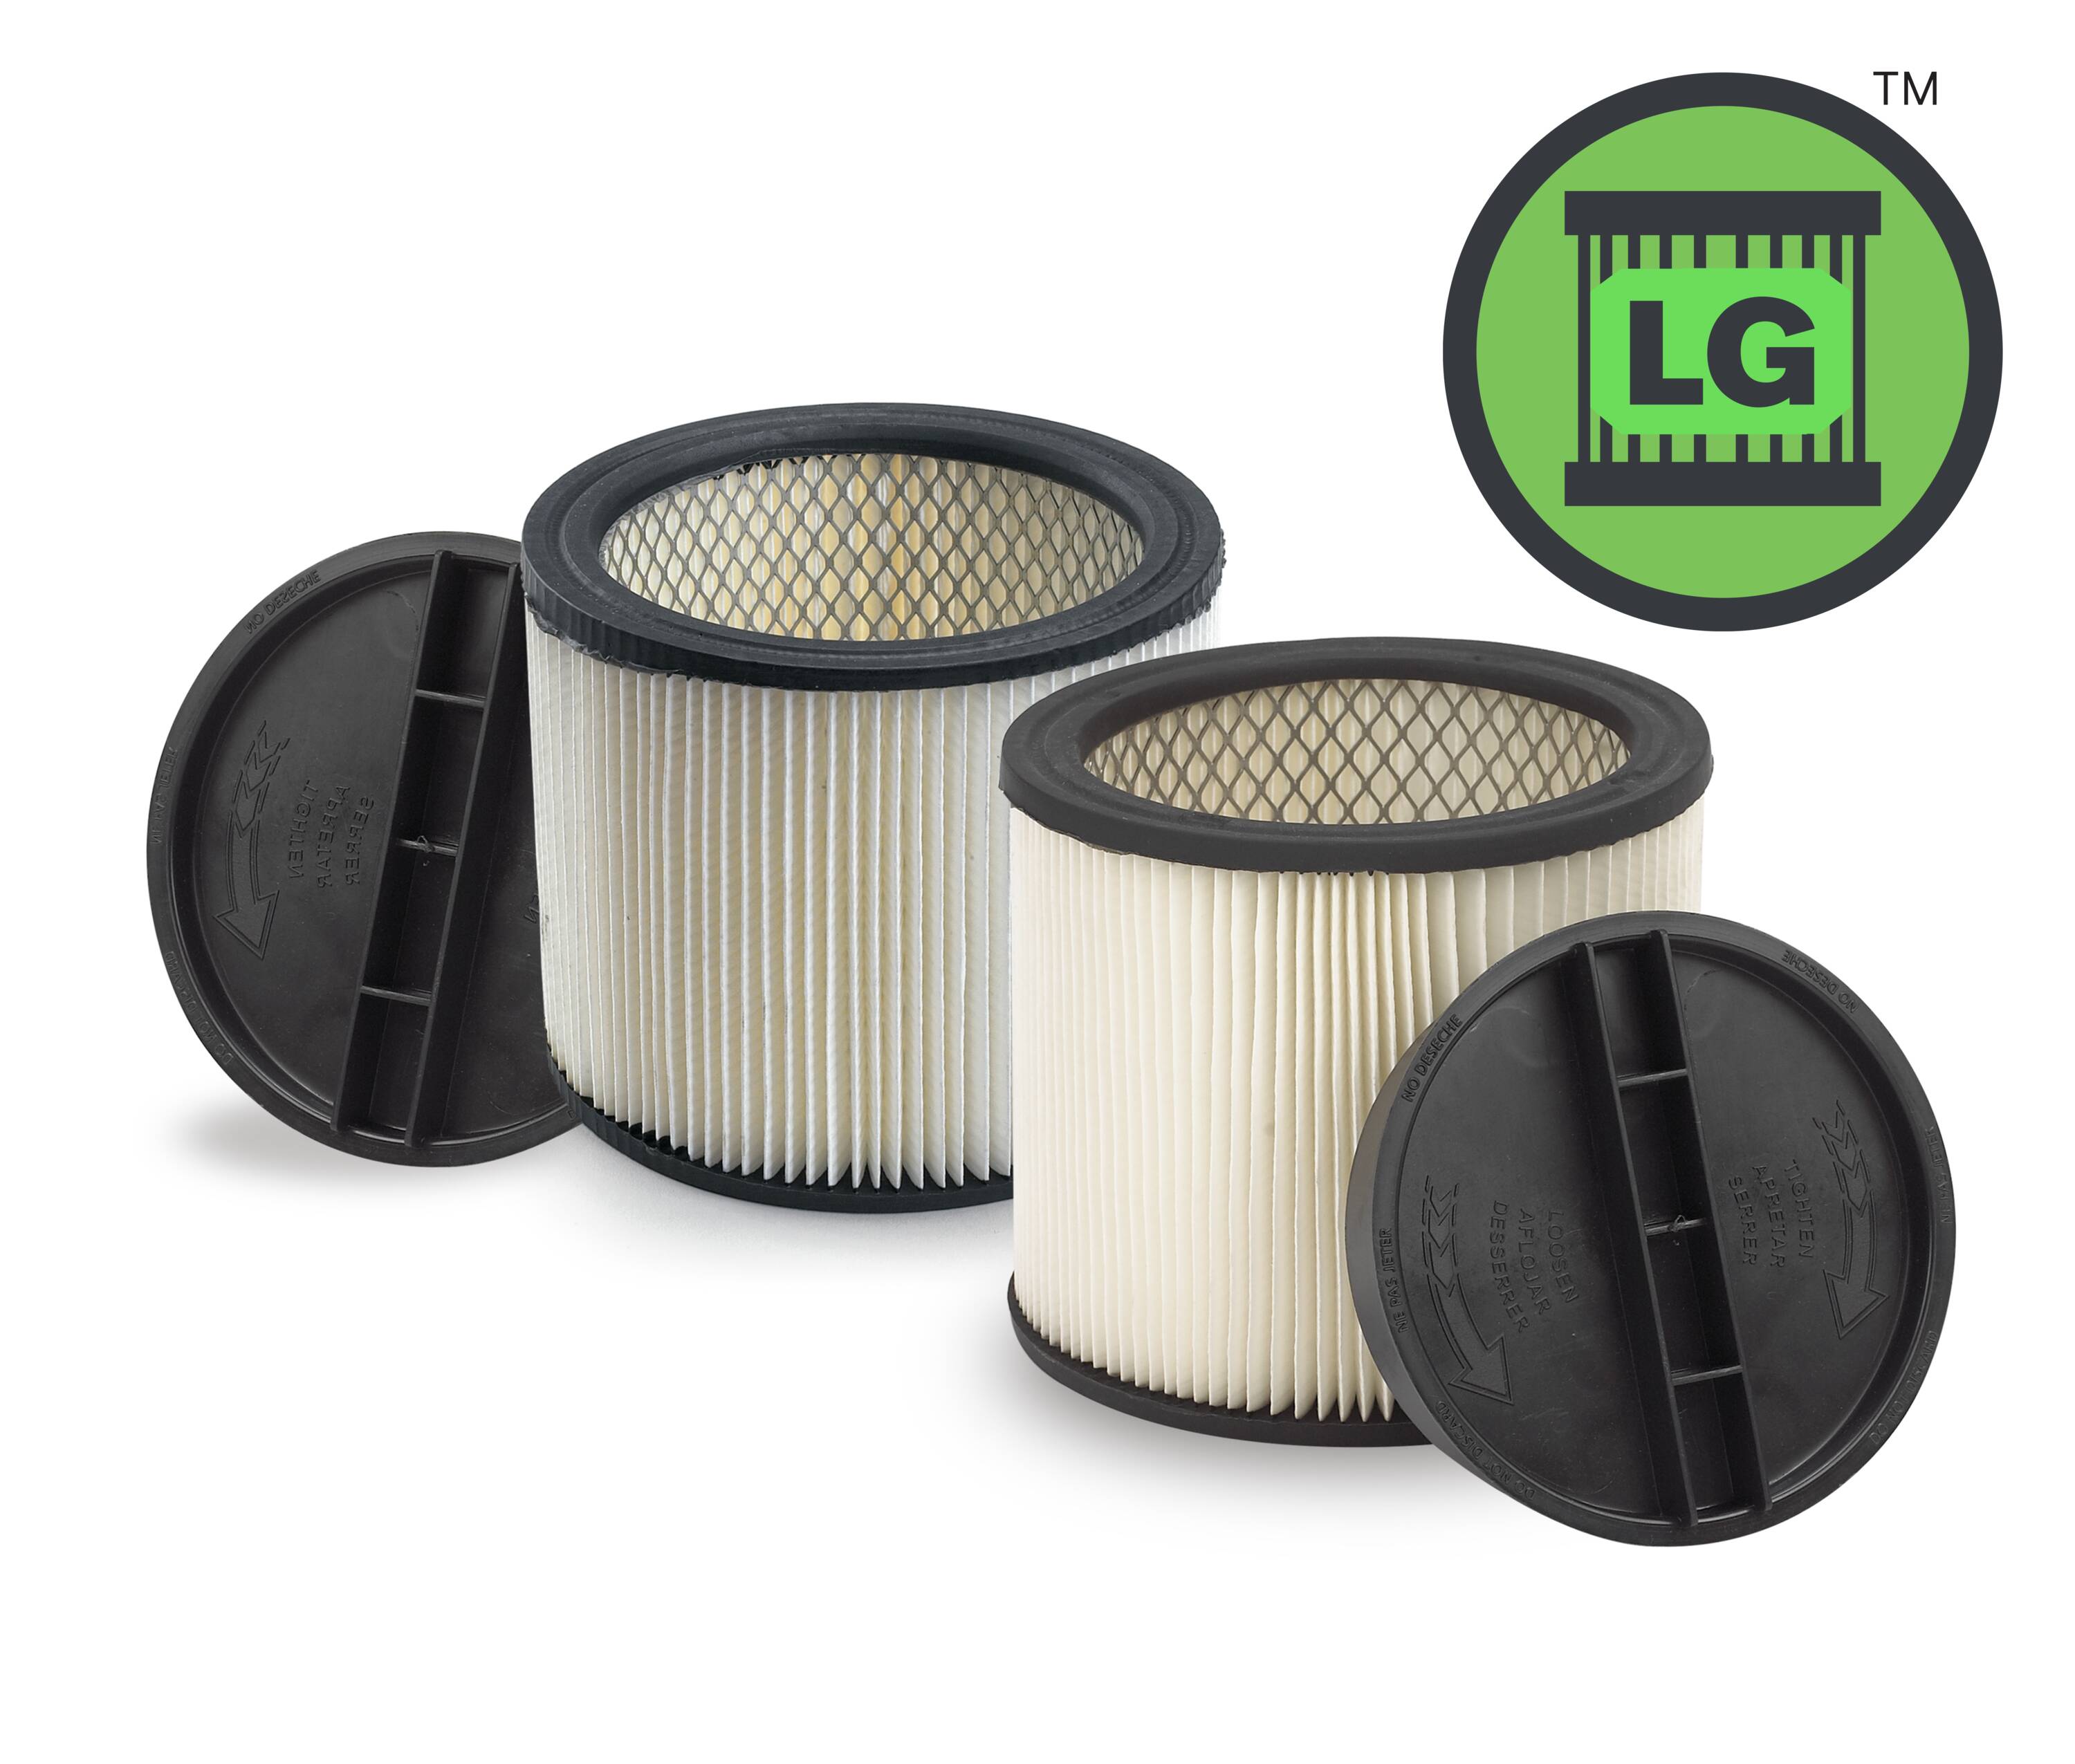 Hand Vac Replacement Pleated Filter